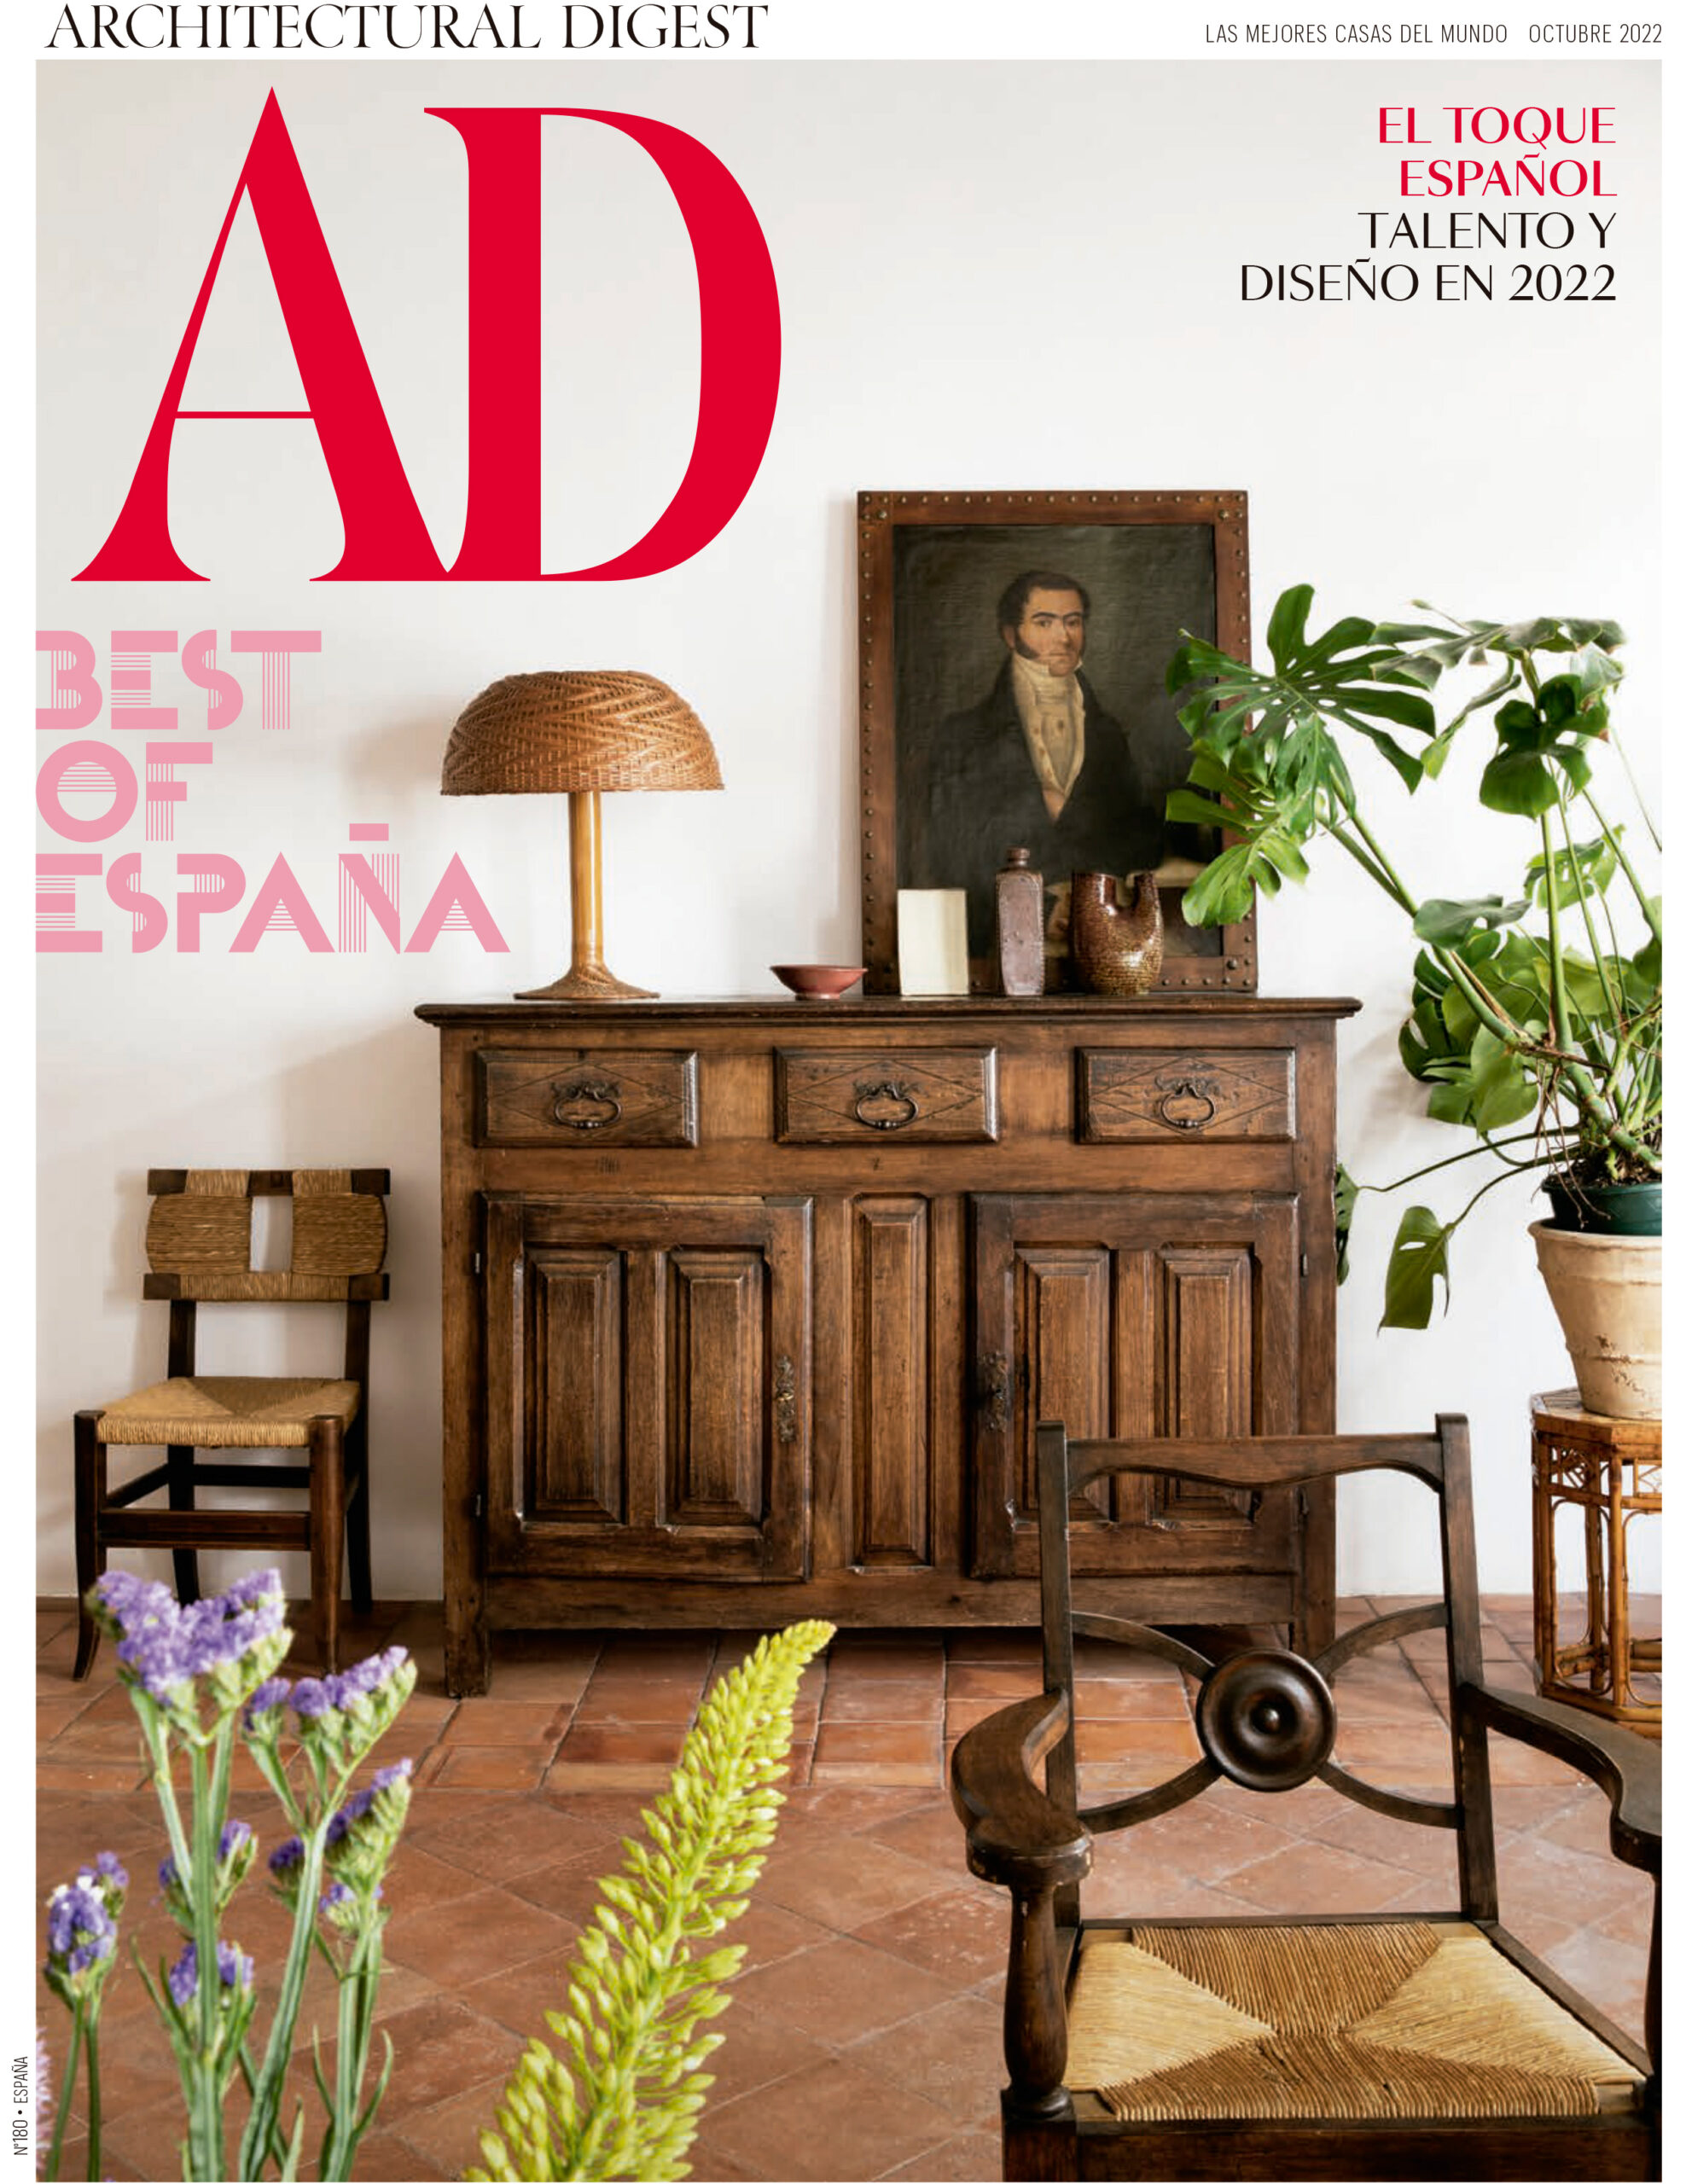 Let's Pause named Best of Spain 2022 by Architectural Digest - let's pause